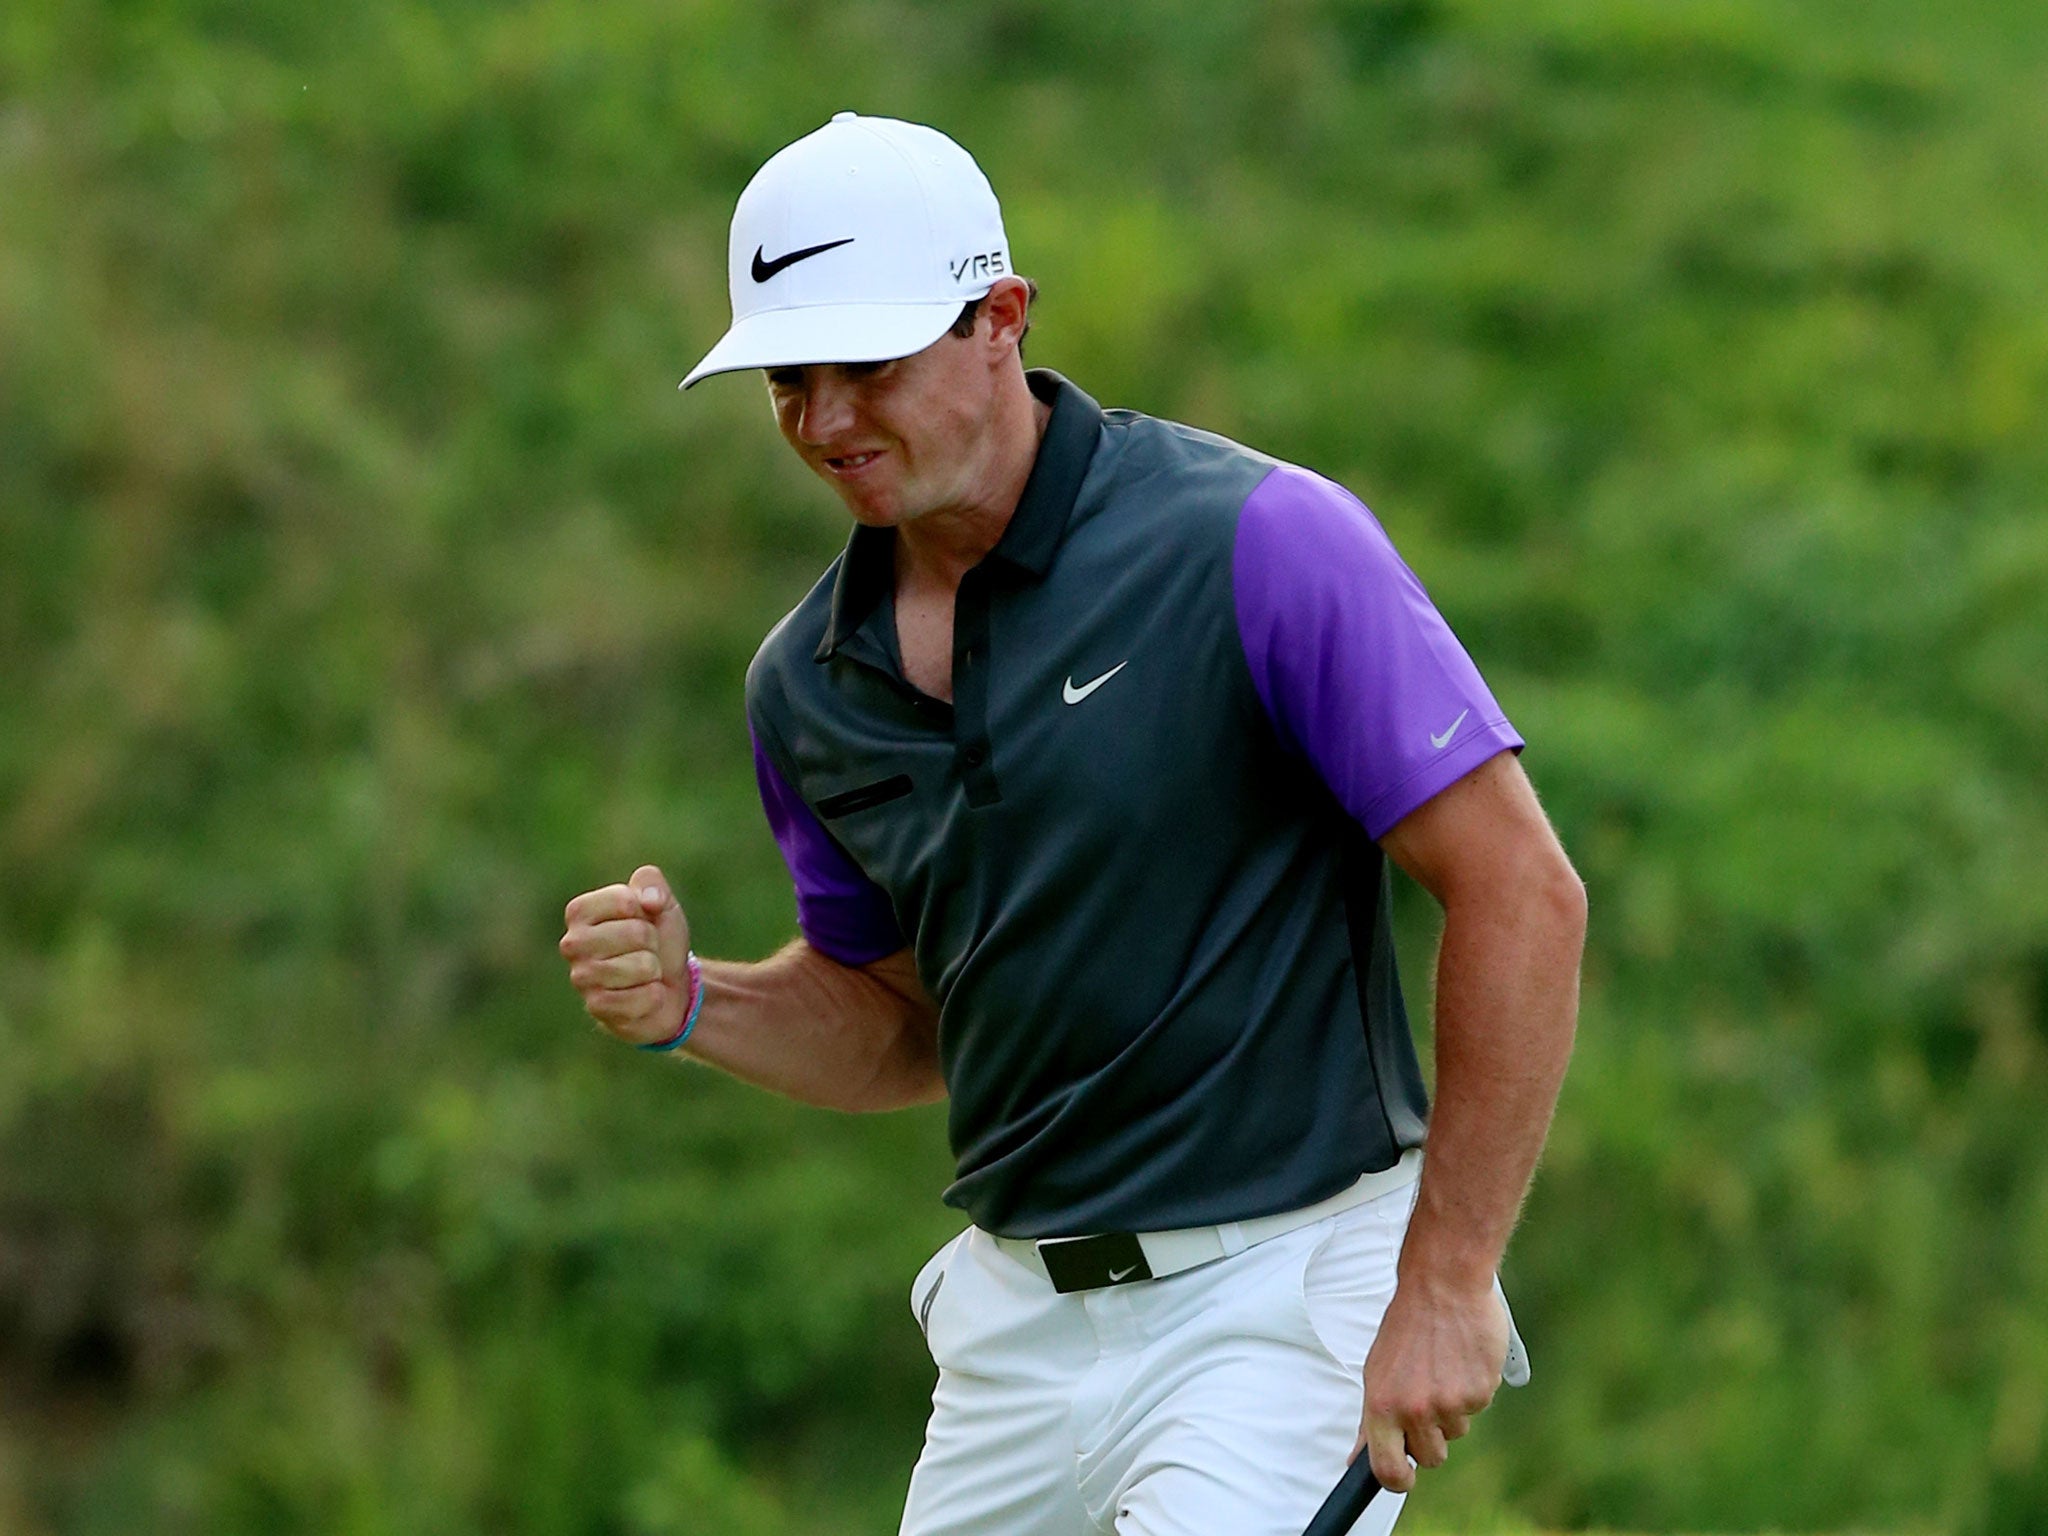 Rory McIlroy celebrates a birdie at 13 on his way to the US PGA Championship